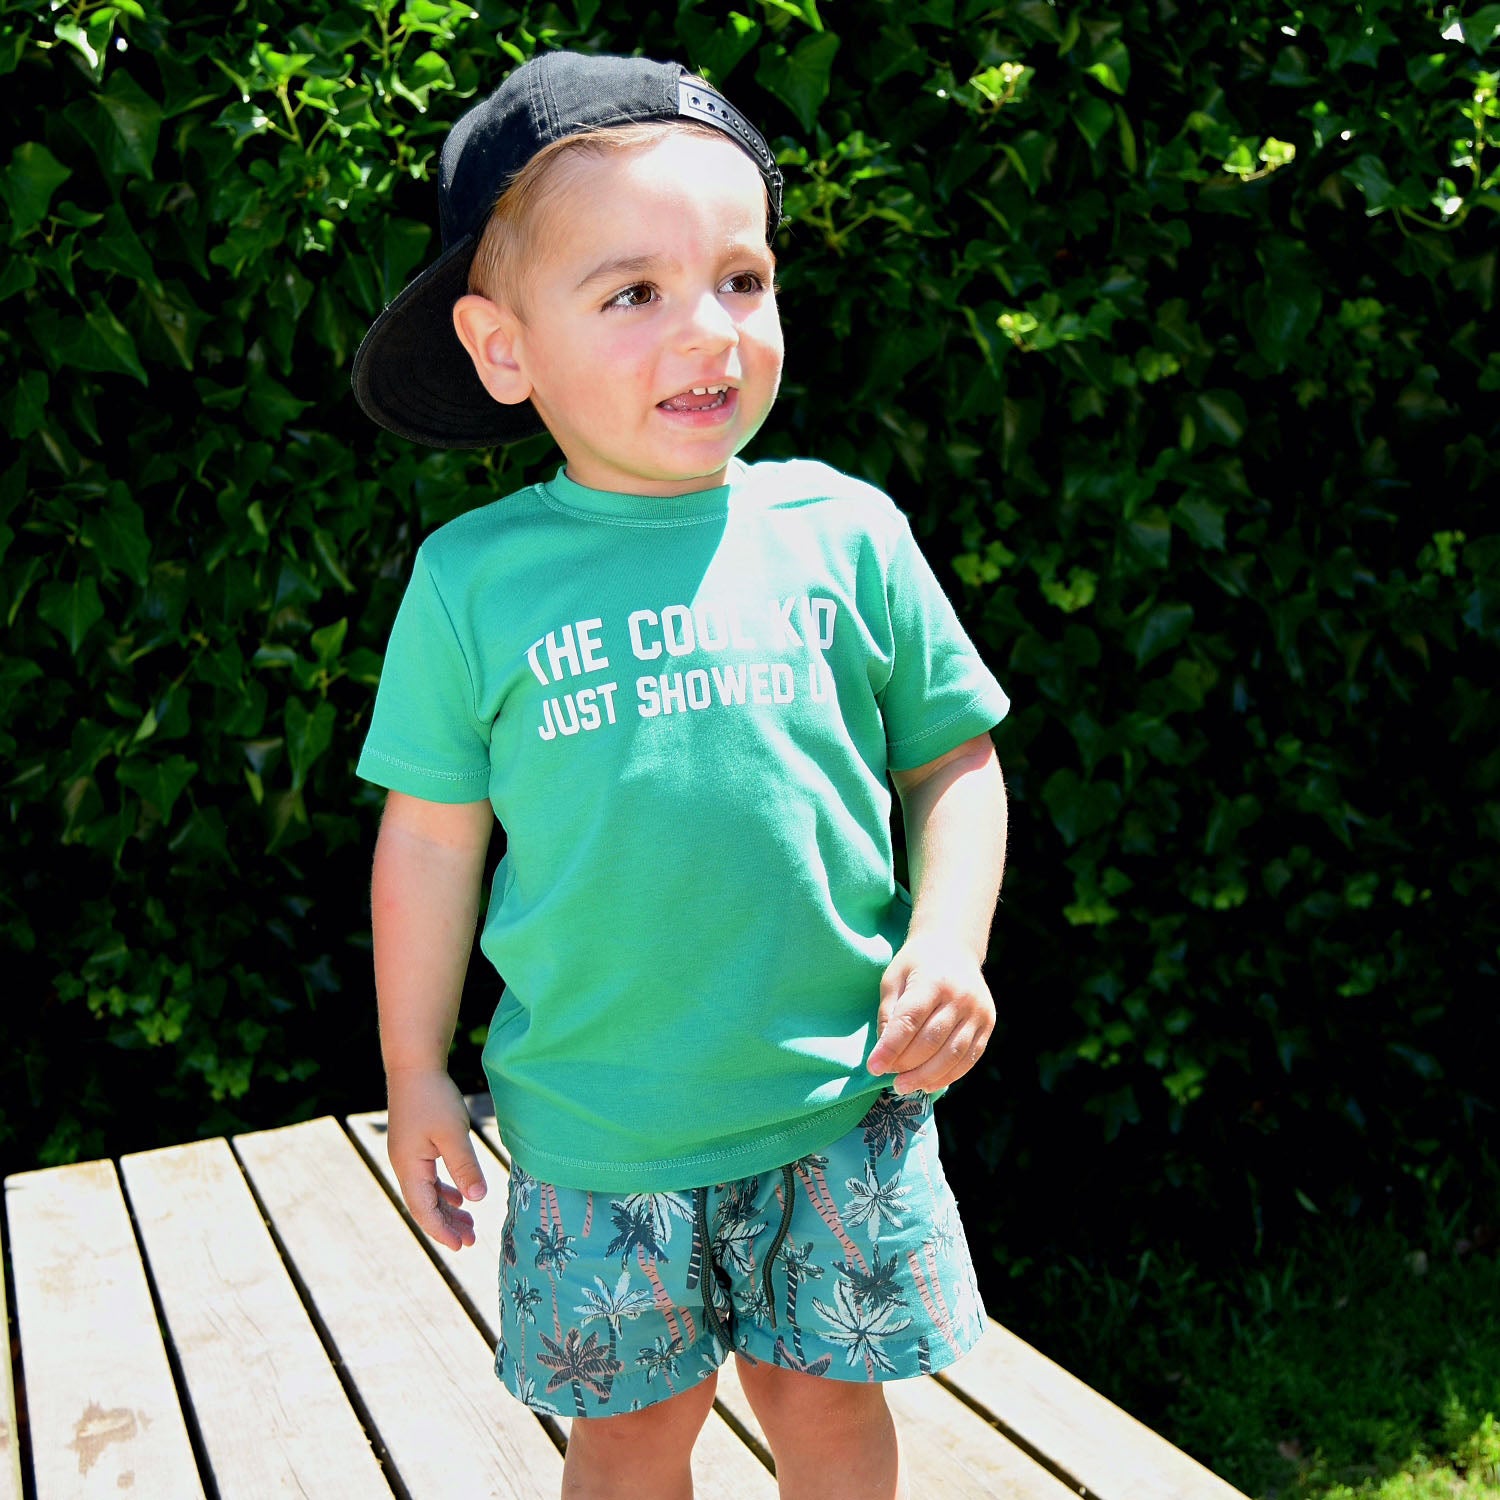 'The cool kid just showed up' baby shortsleeve shirt